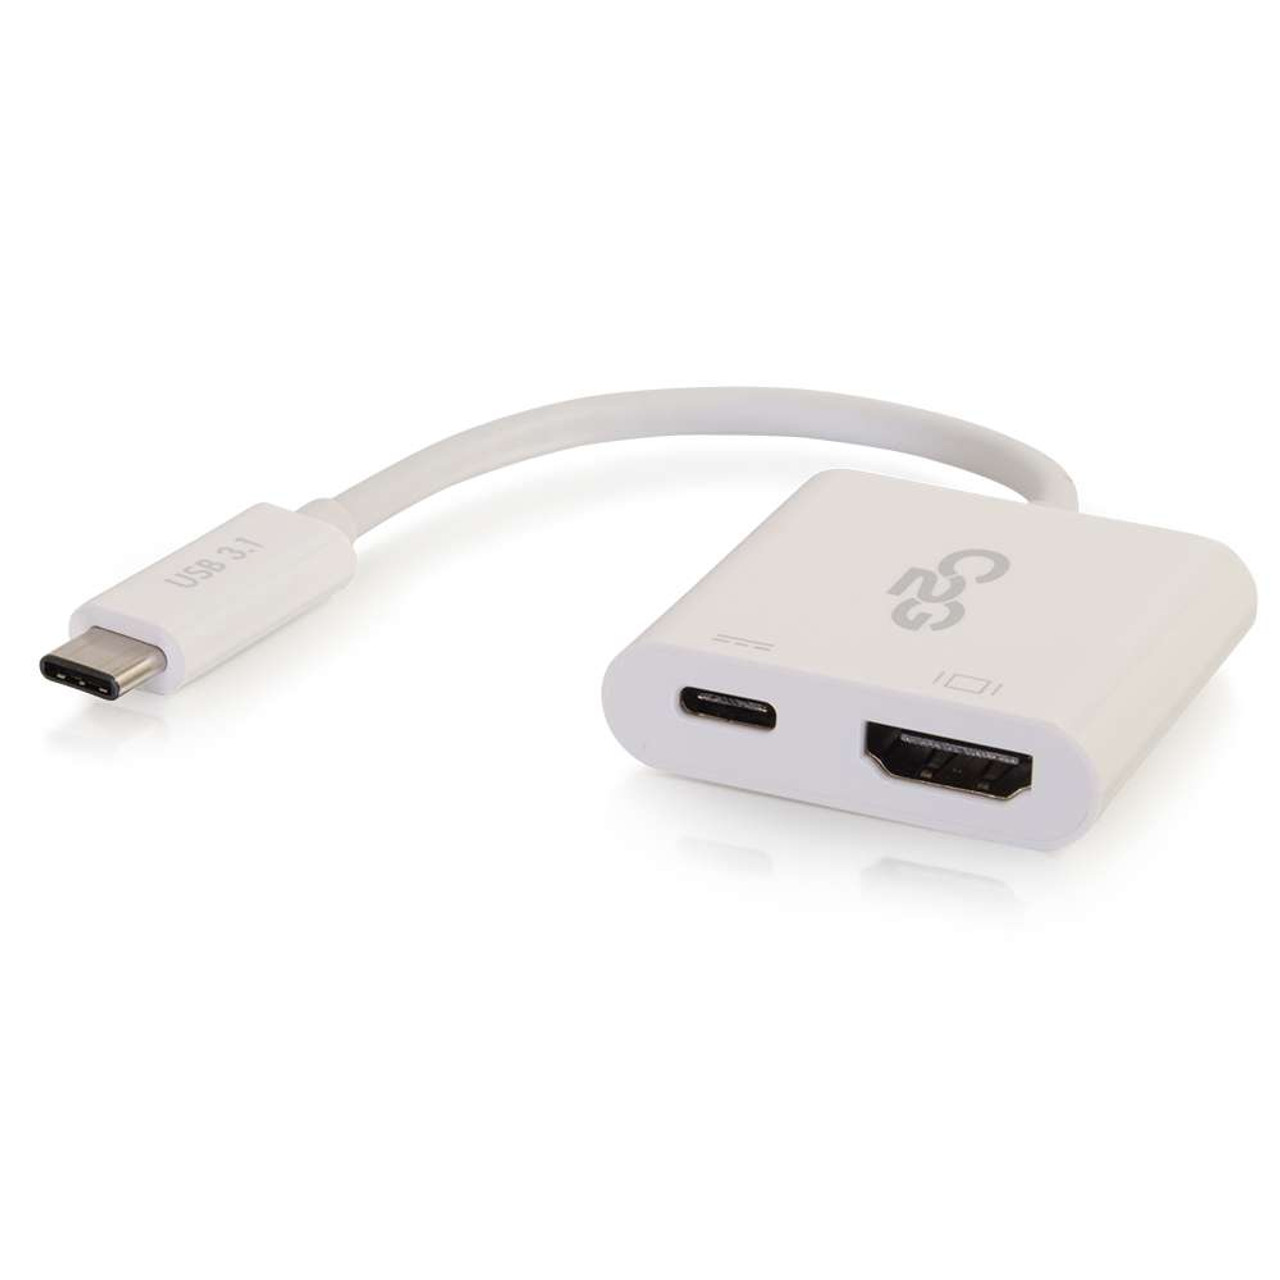 USB-C To HDMI AV Adapter Converter With Power Delivery - White AV Cables